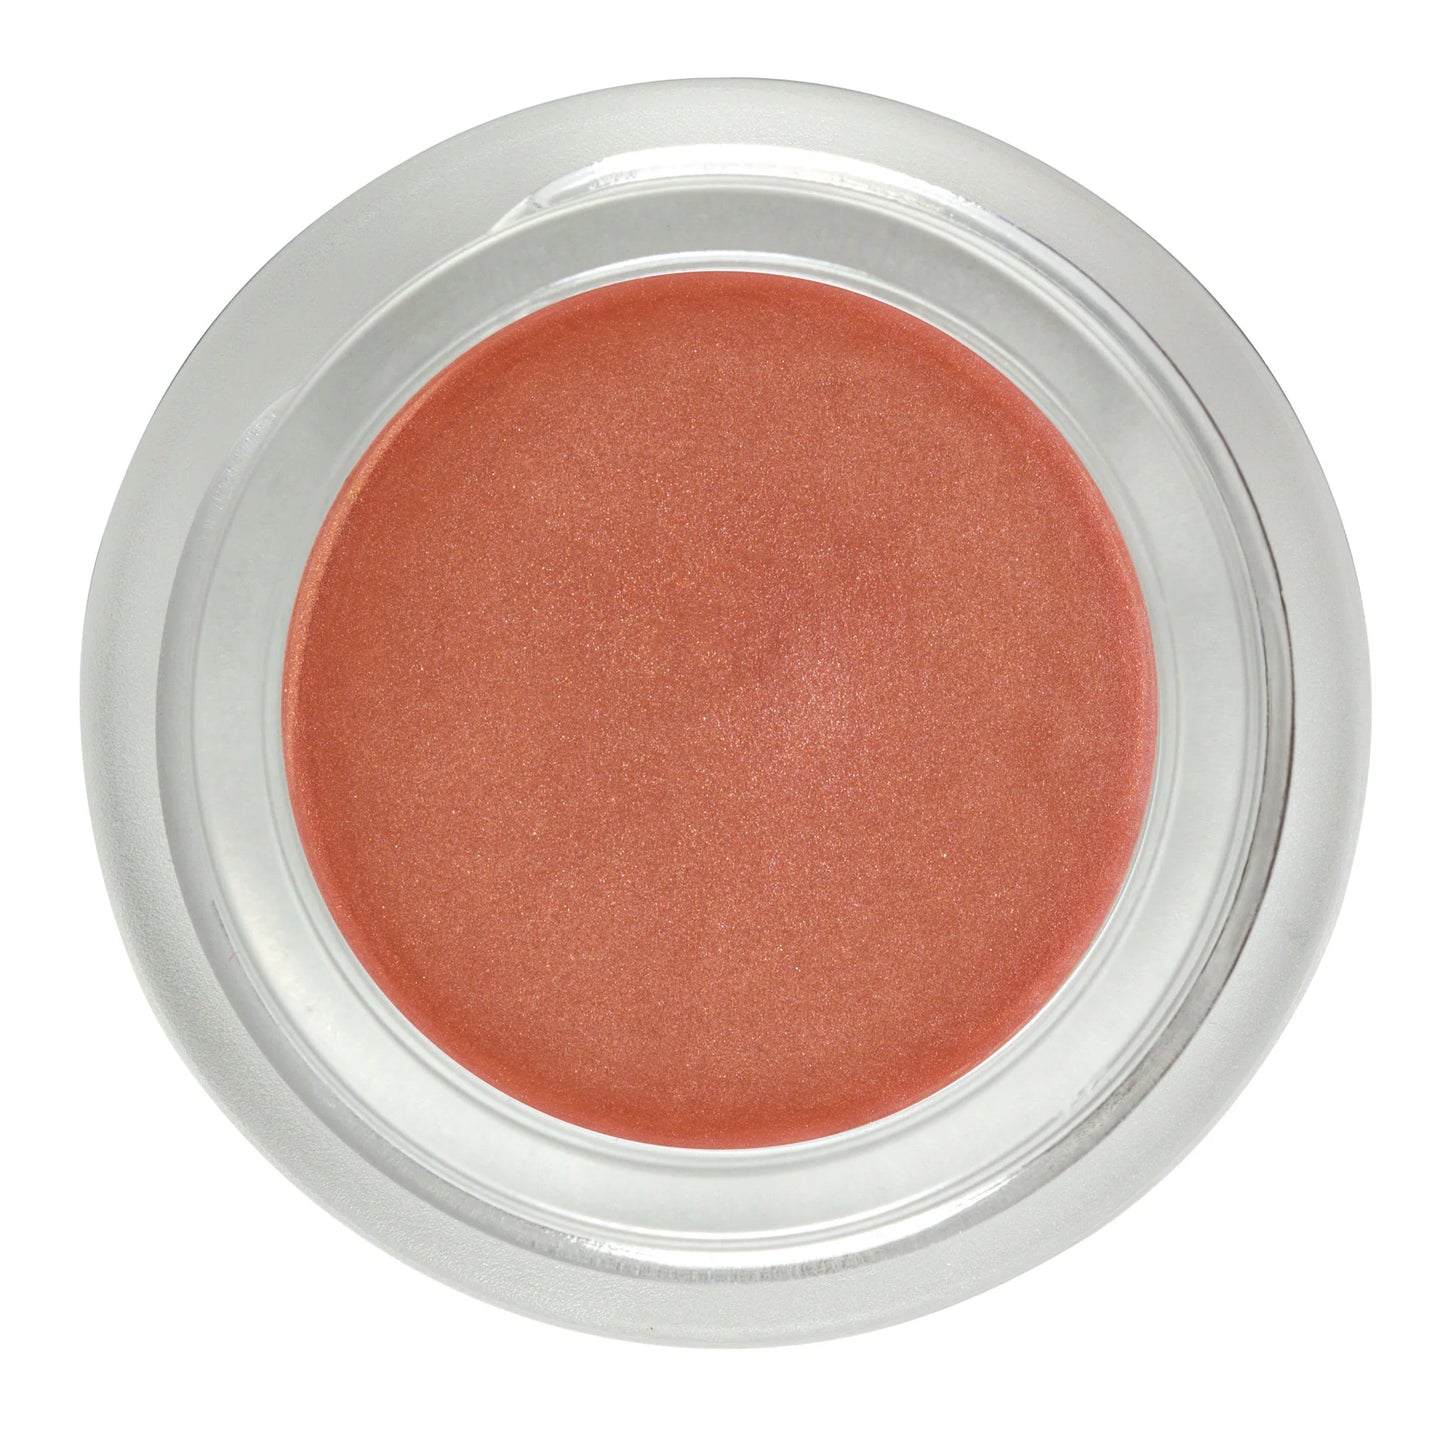 Cosmic Apricot Shimmer